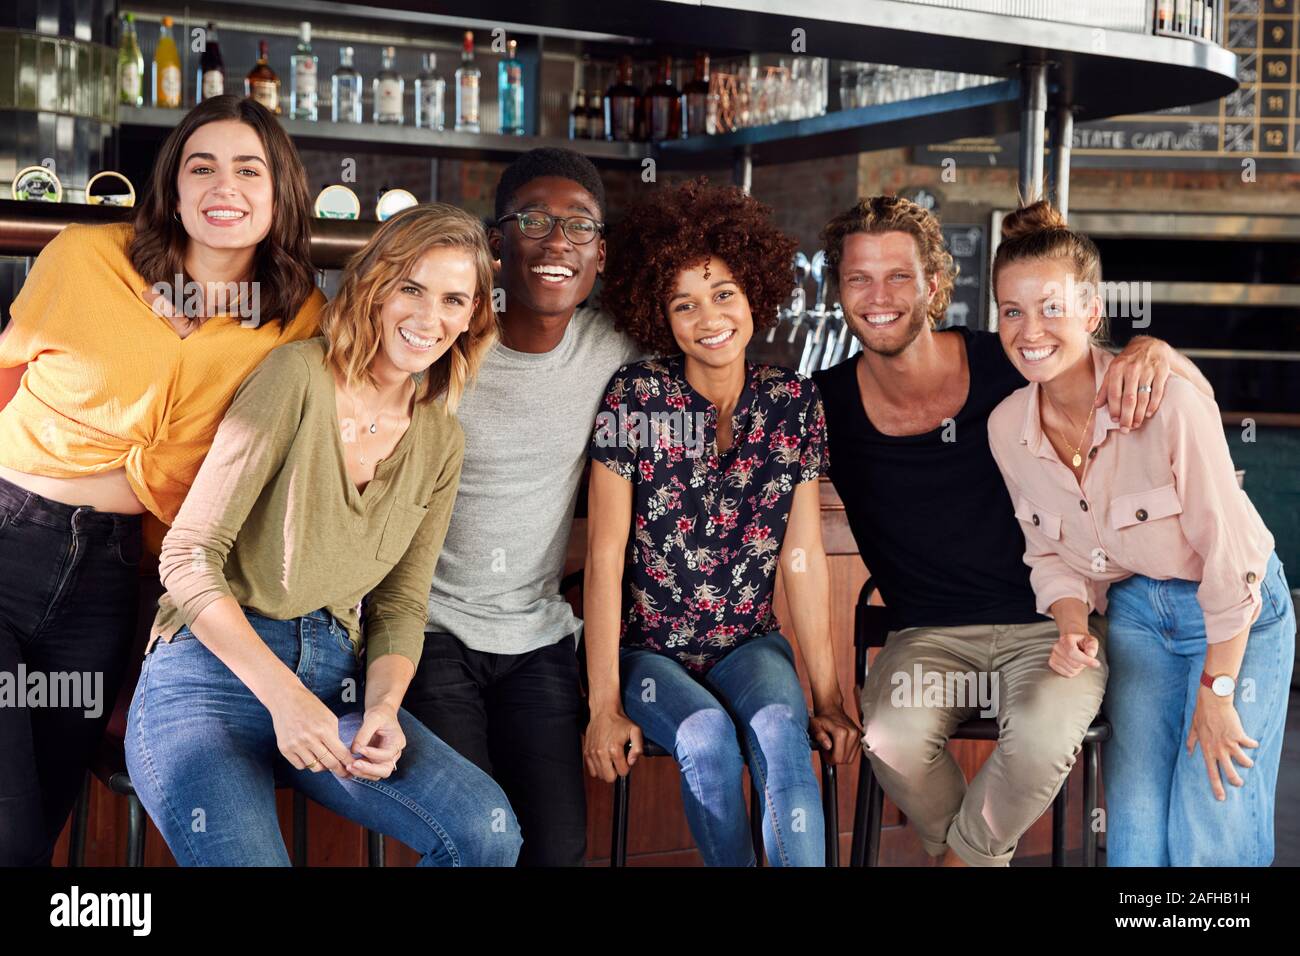 Portrait Of Male And Female Friends Sitting By Counter In Sports Bar Stock Photo